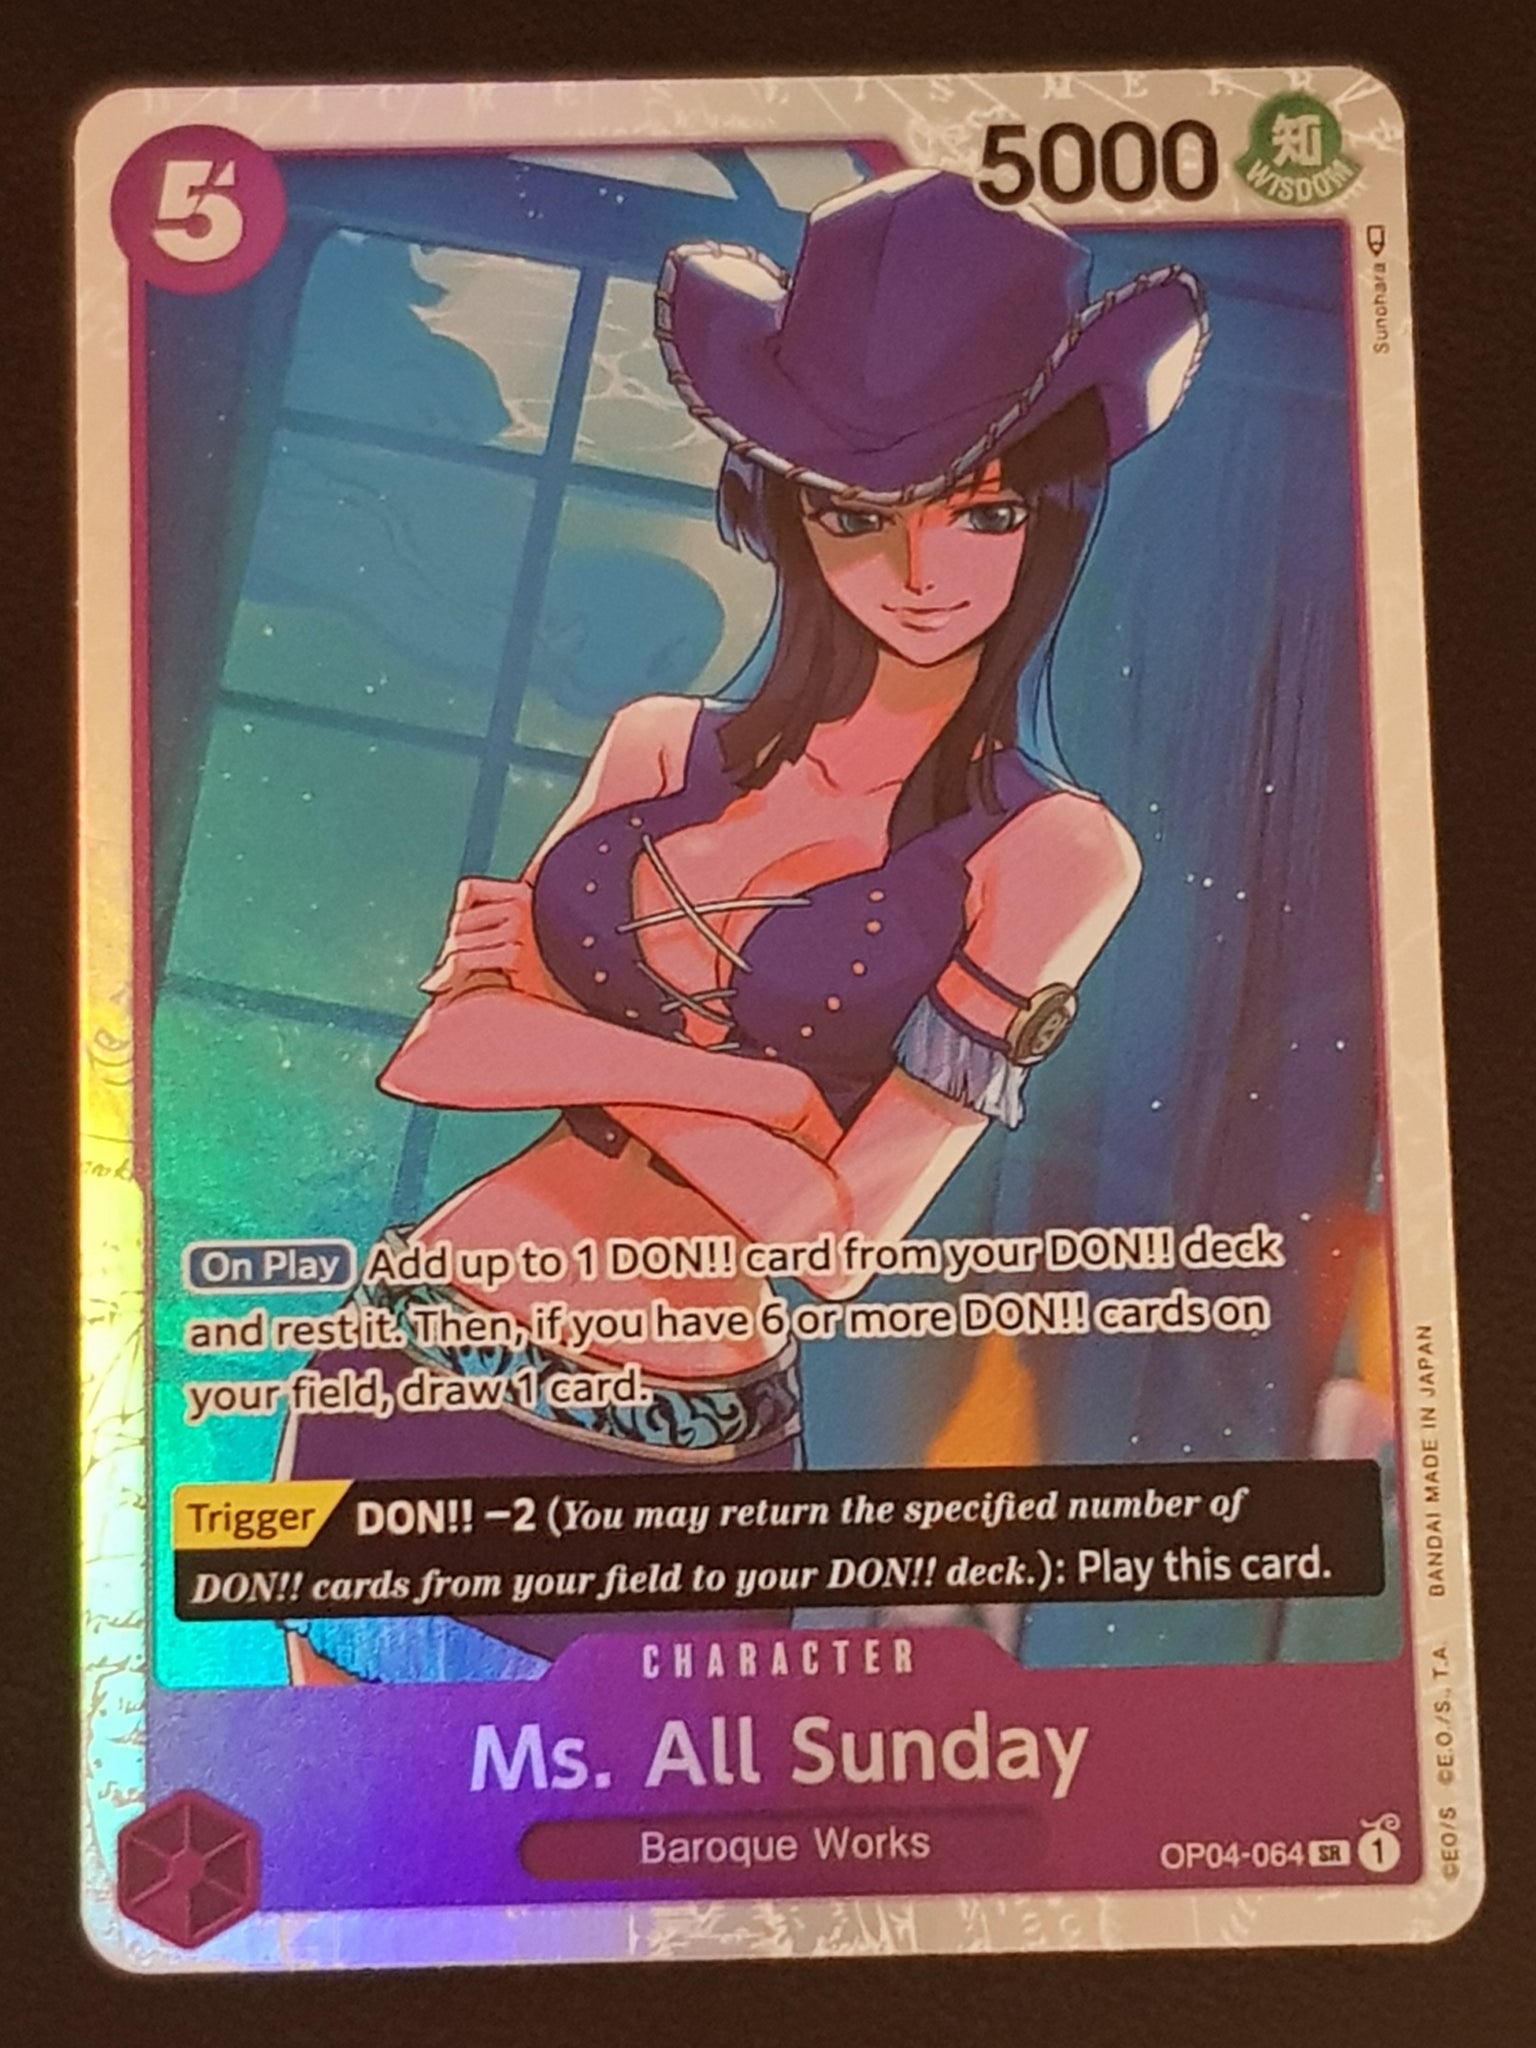 One Piece Card Game OP-04 Kingdoms of Intrigue Ms. All Sunday #OP04-064 SR Foil Trading Card